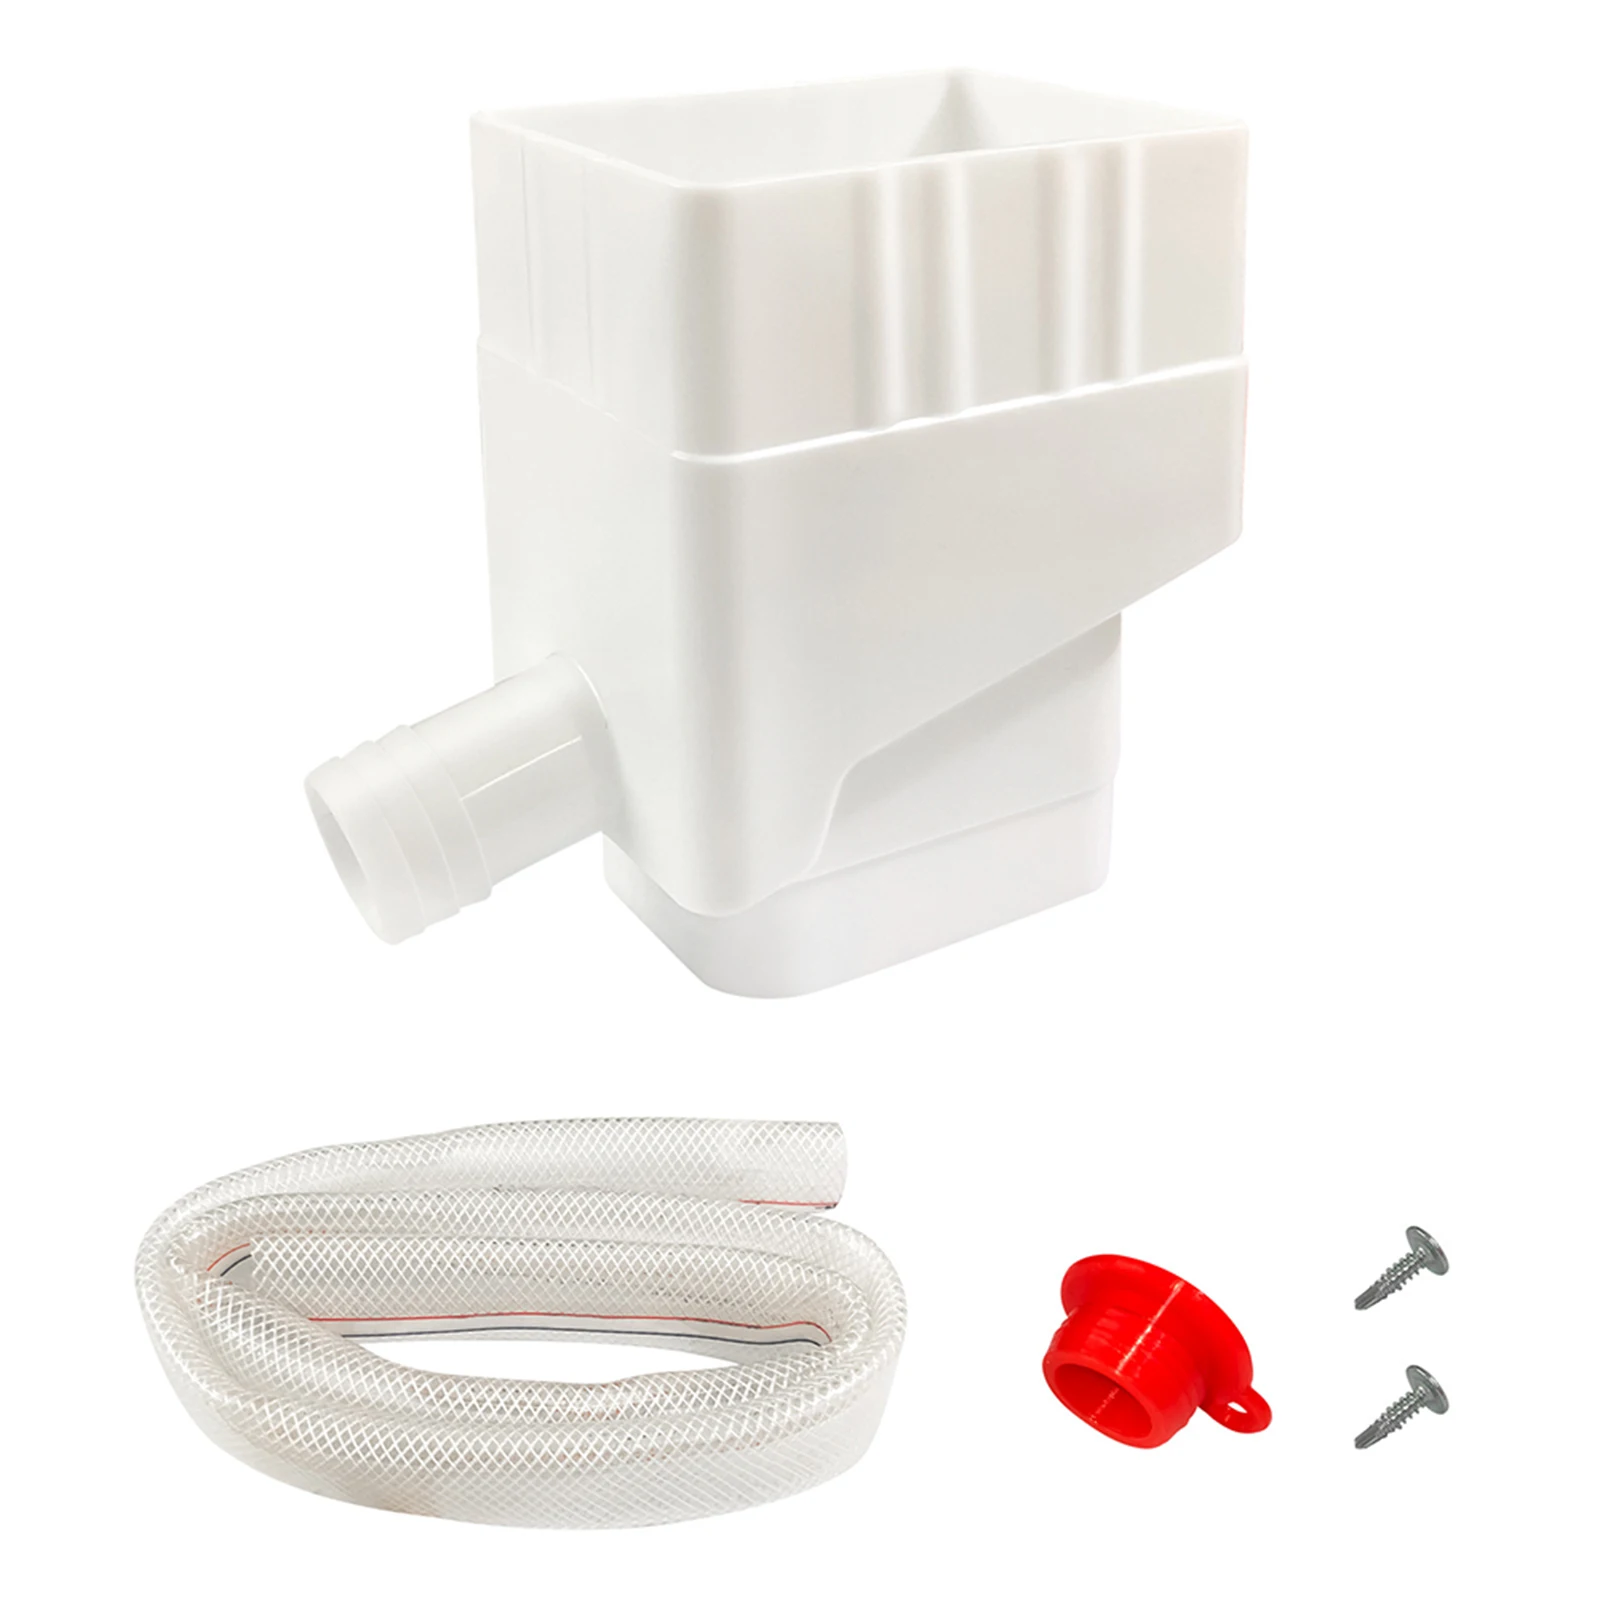 

Gardens Main Body Red Silicone Plug With 40in Hose Rainwater Collection System Red Silicone Plug Diverter Connector Main Body